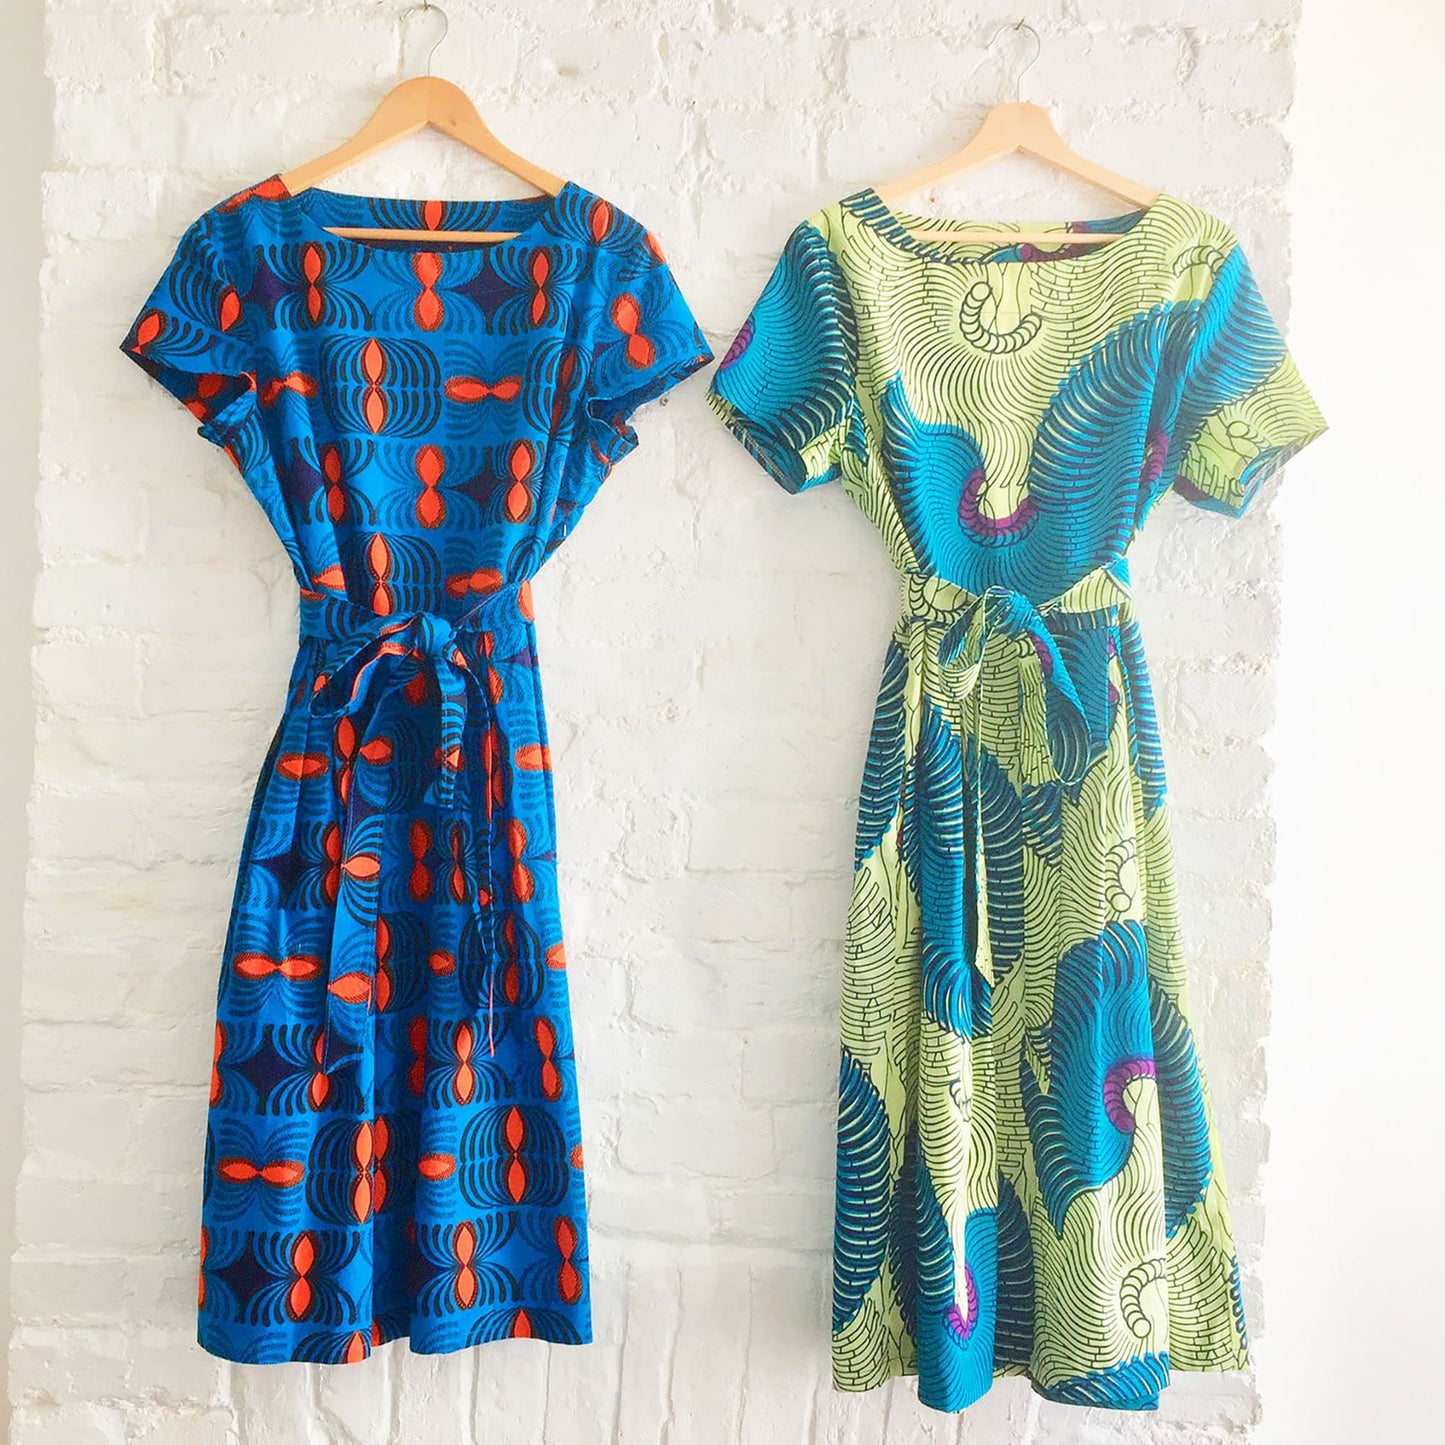 CECILY DRESS sewing pattern